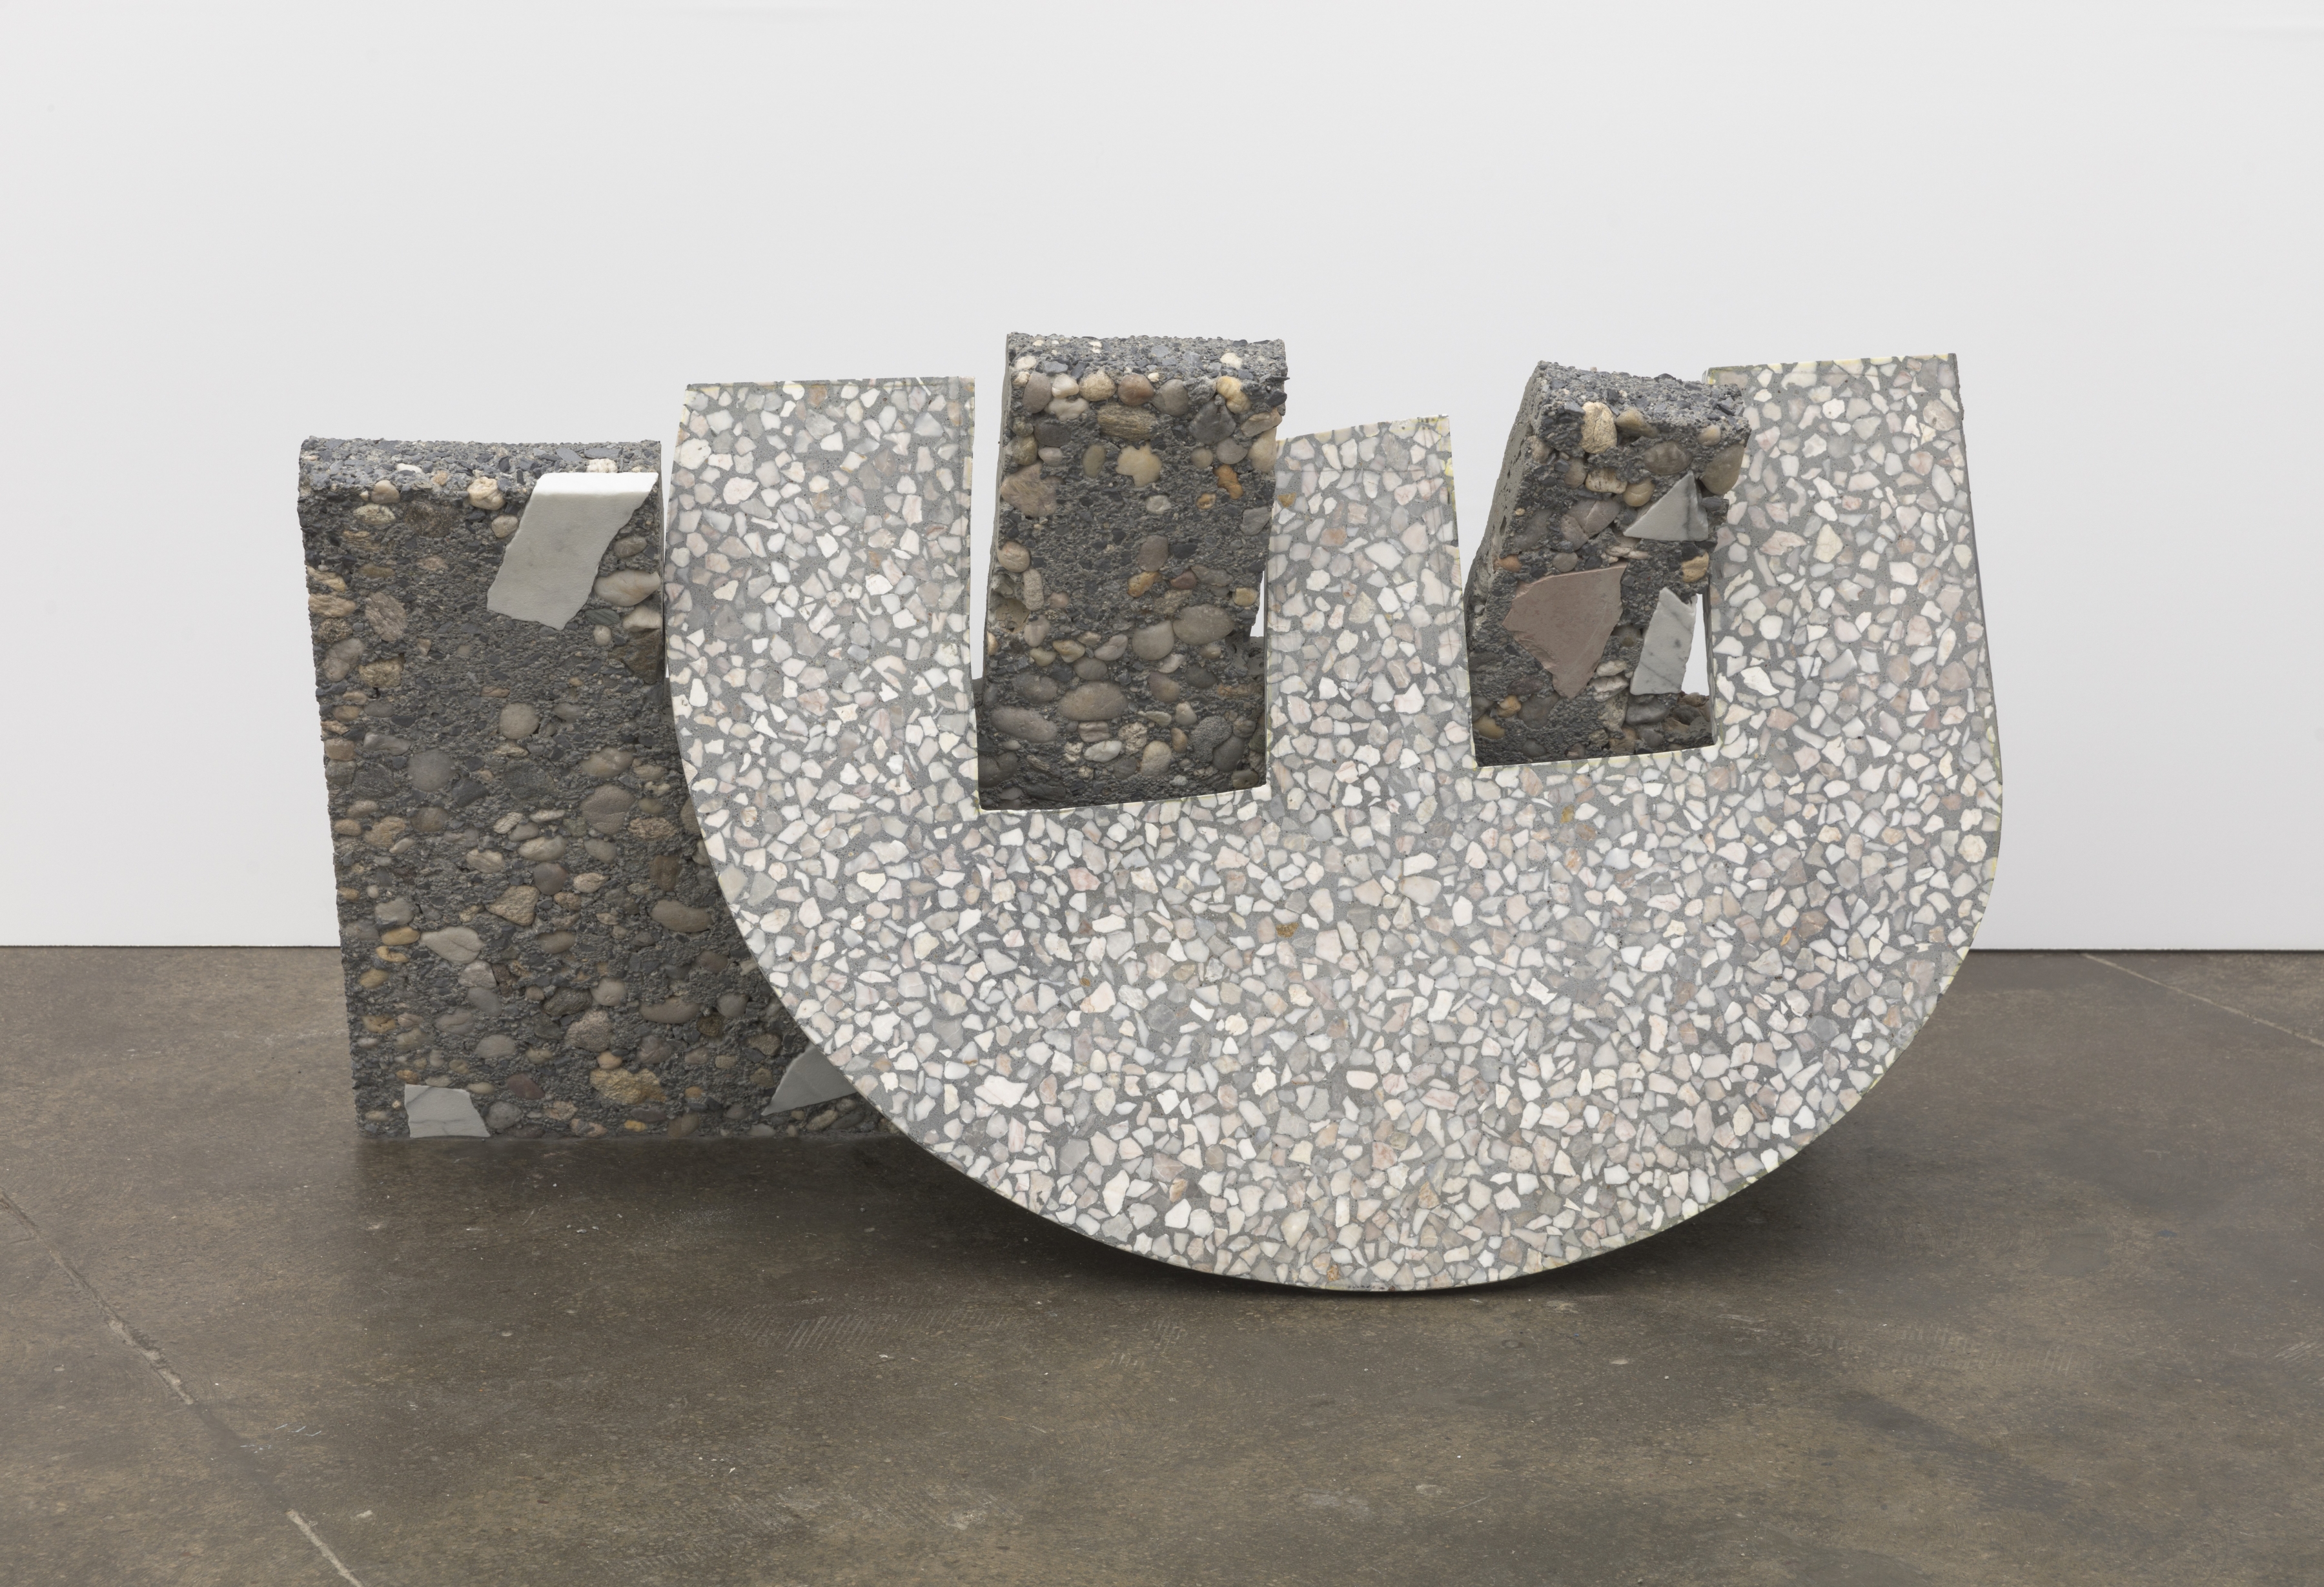 Dependents 7, 2021
soapstone and terrazzo
23 1/16 x 39 3/4 x 14 3/4 inches (58.5 x 101 x 37.5 cm) SM-S.21.1441
&nbsp;